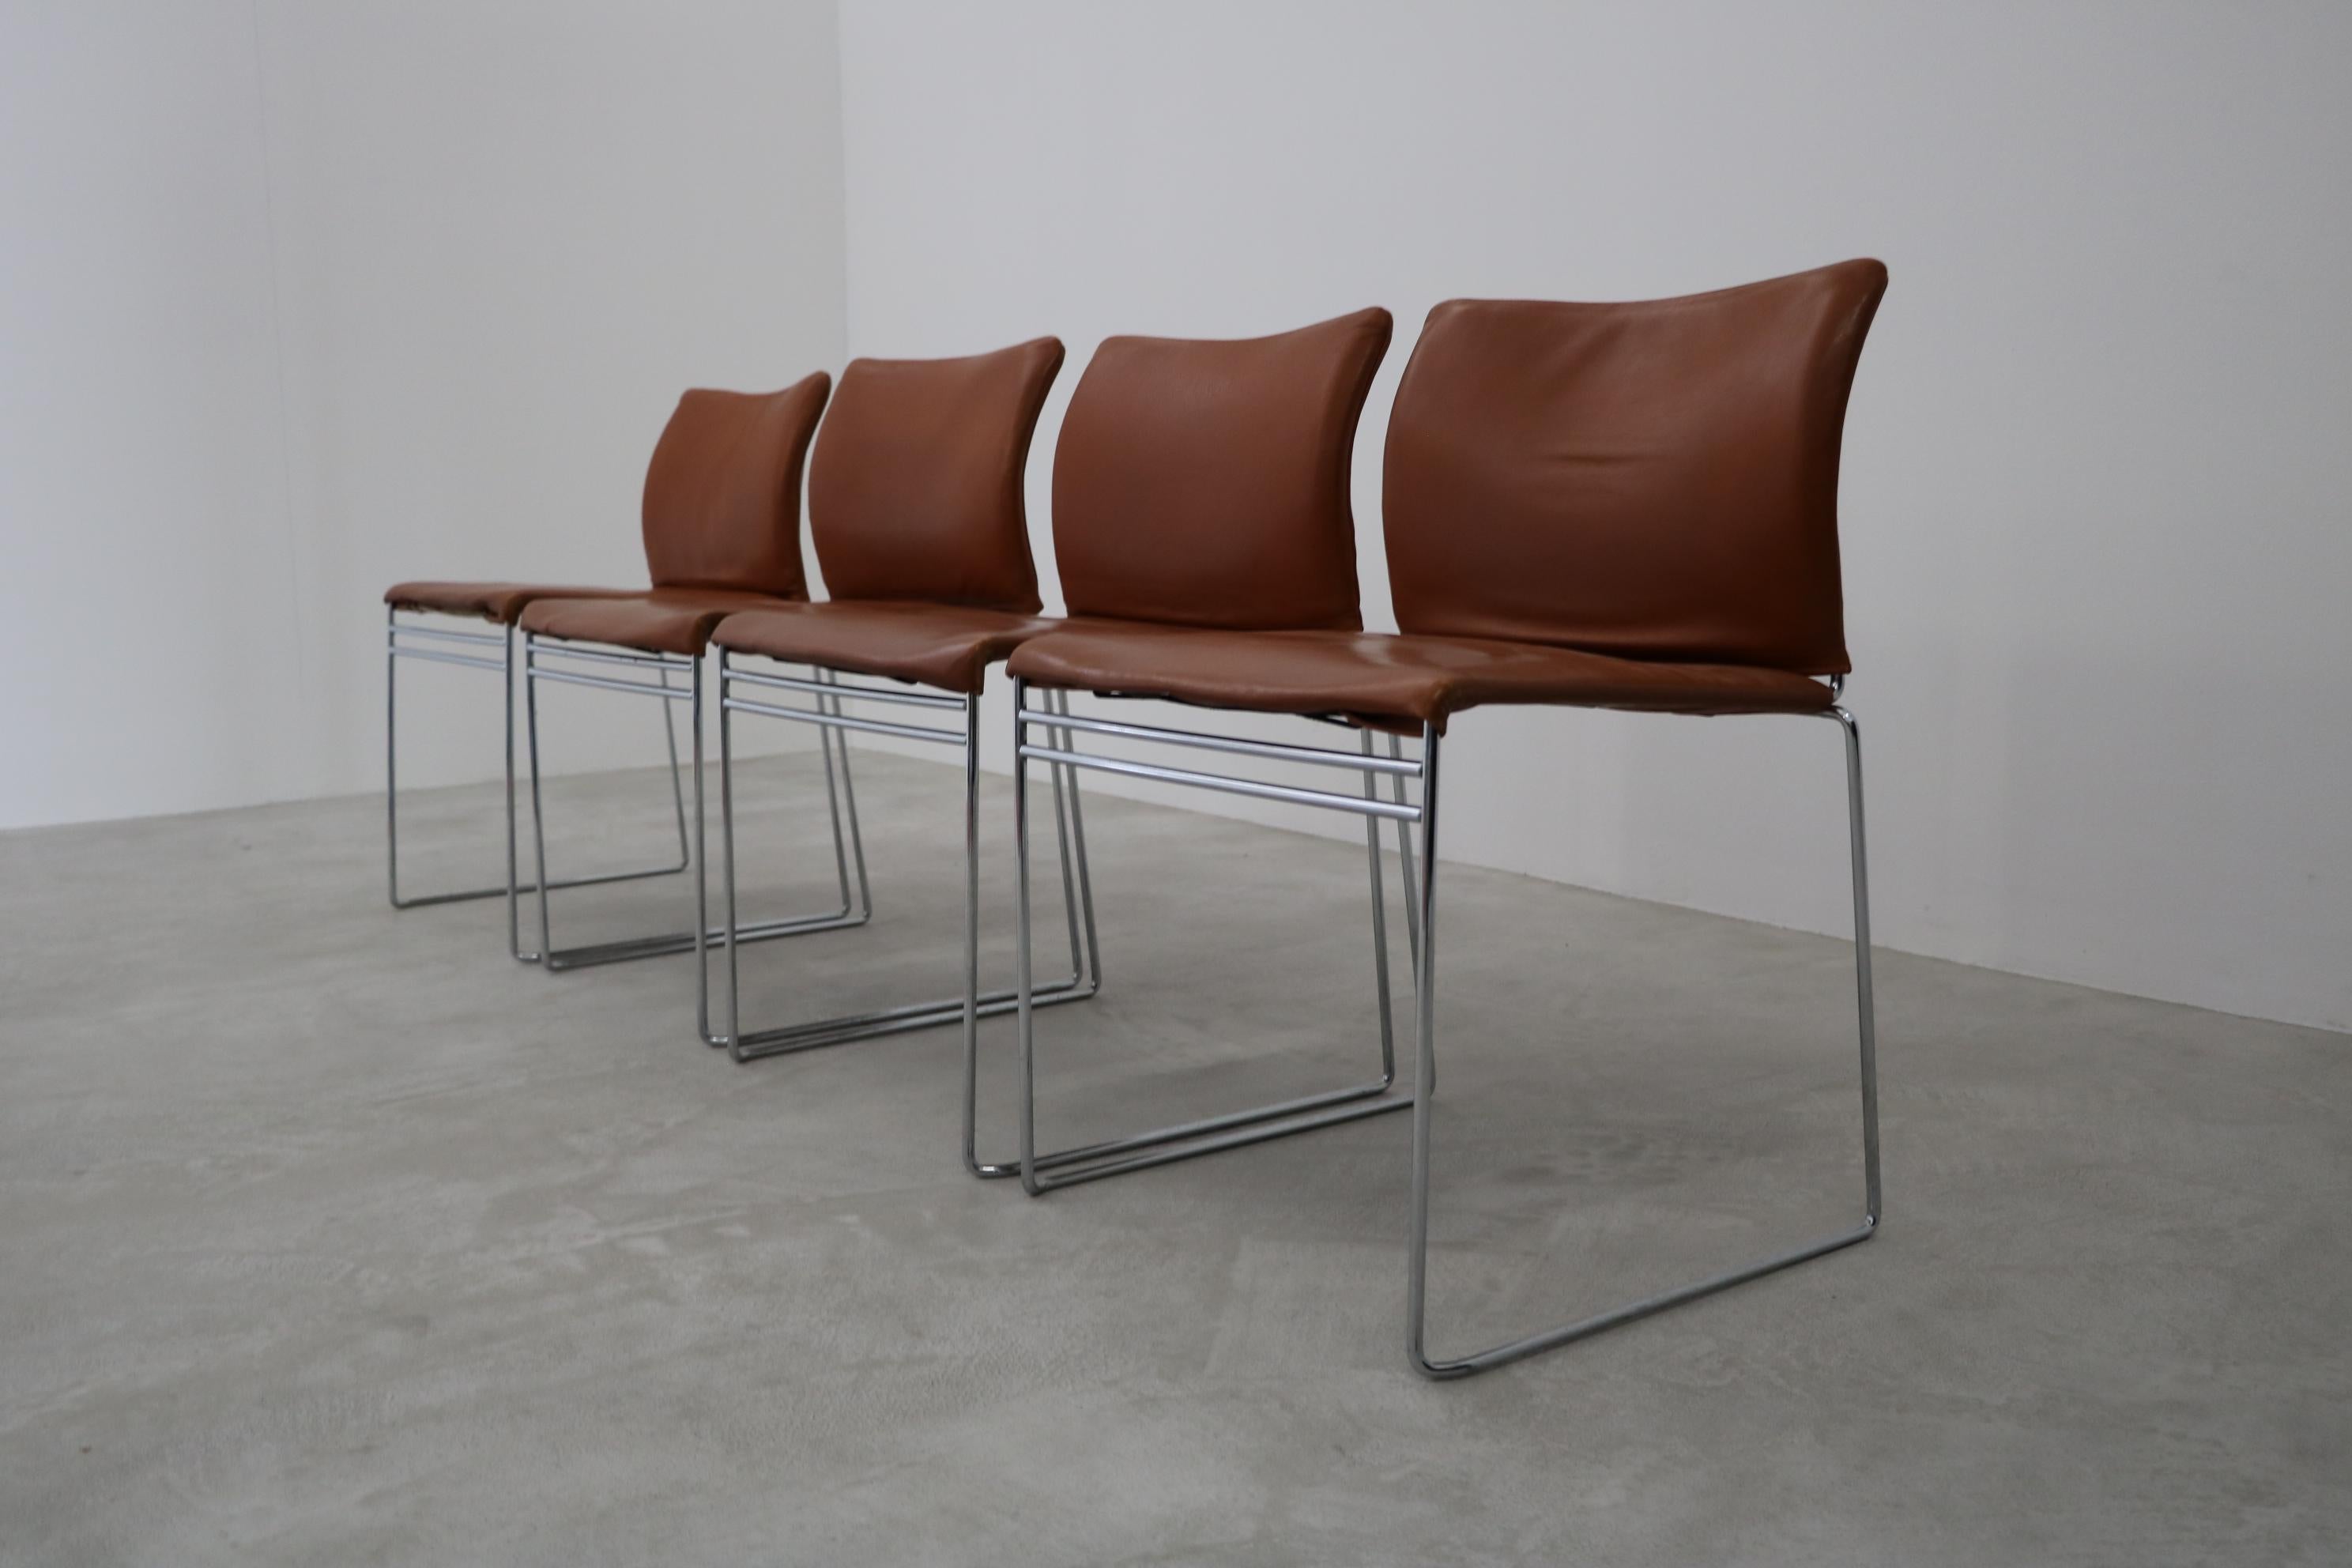 A set of four chairs model 'Jano' designed by Kazuhide Takahama, produced by Simon Gavina in cogac leather.
The chairs are in a beautiful vintage condition with slight signs of use-they are stackable. Larger quantity in stock!